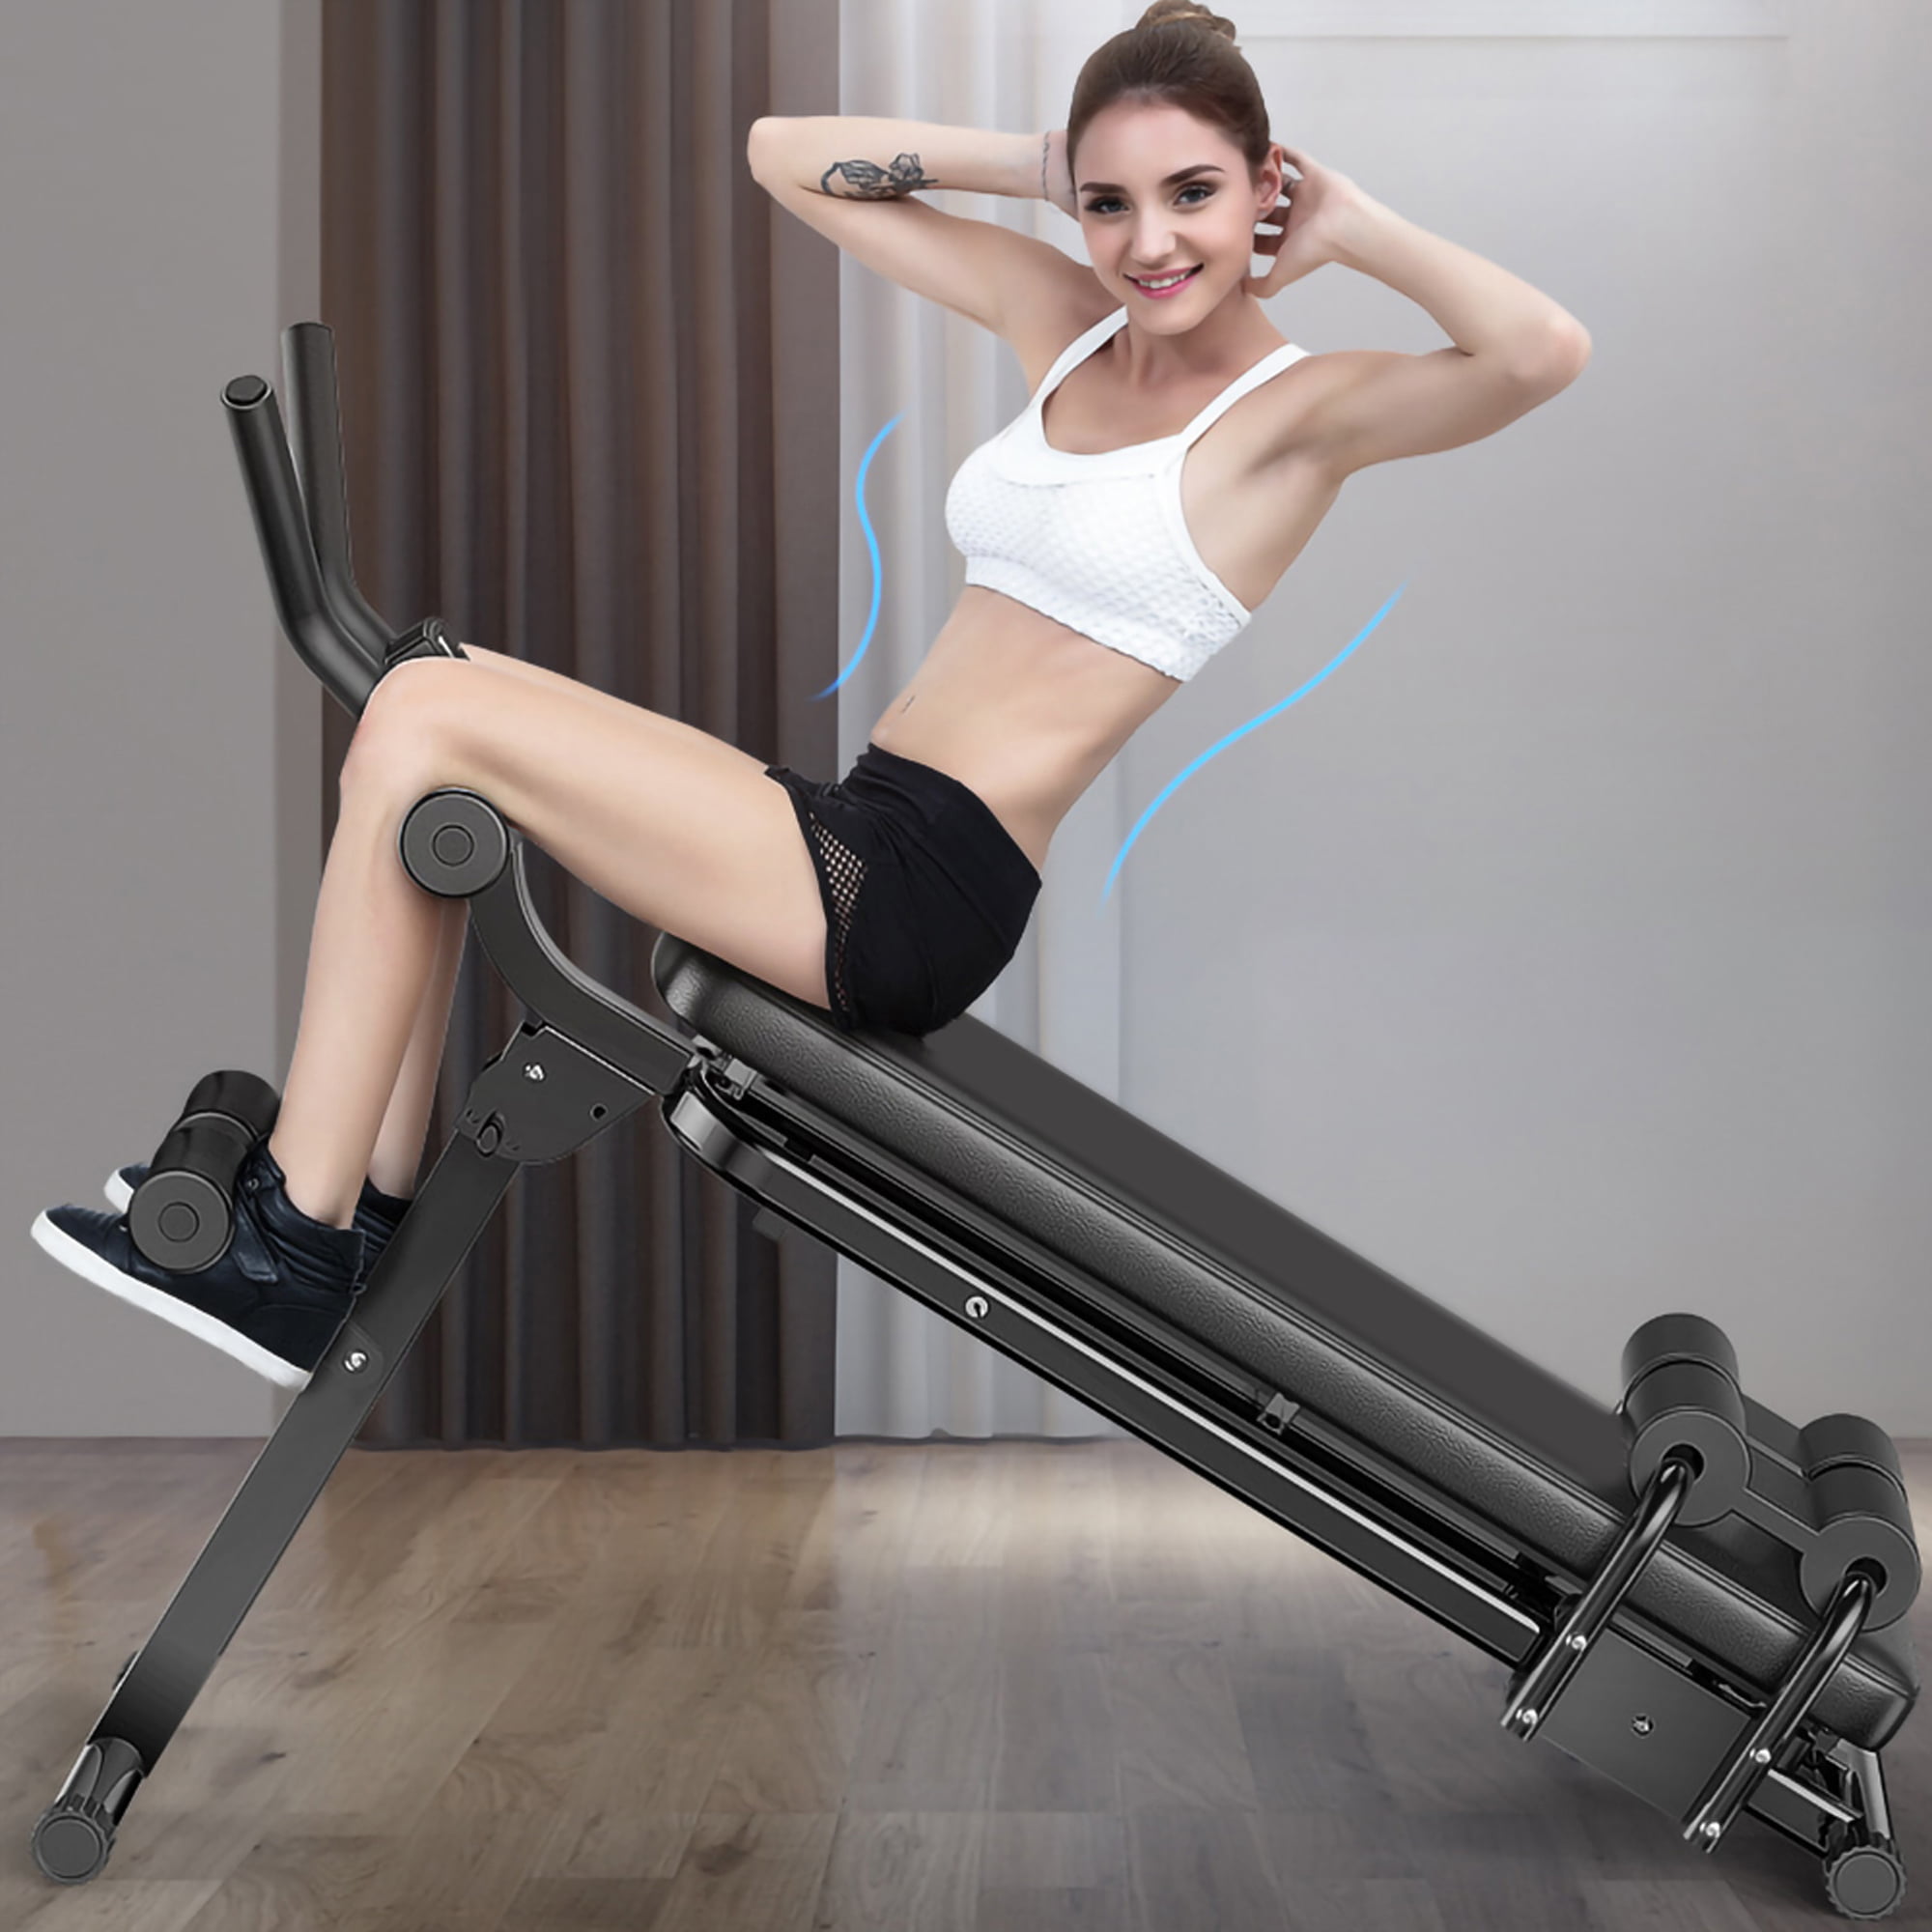 Details about   Foldable Sit Up Bench Decline Abdominal Fitness Gym Exercise Workout Equipment ☆ 